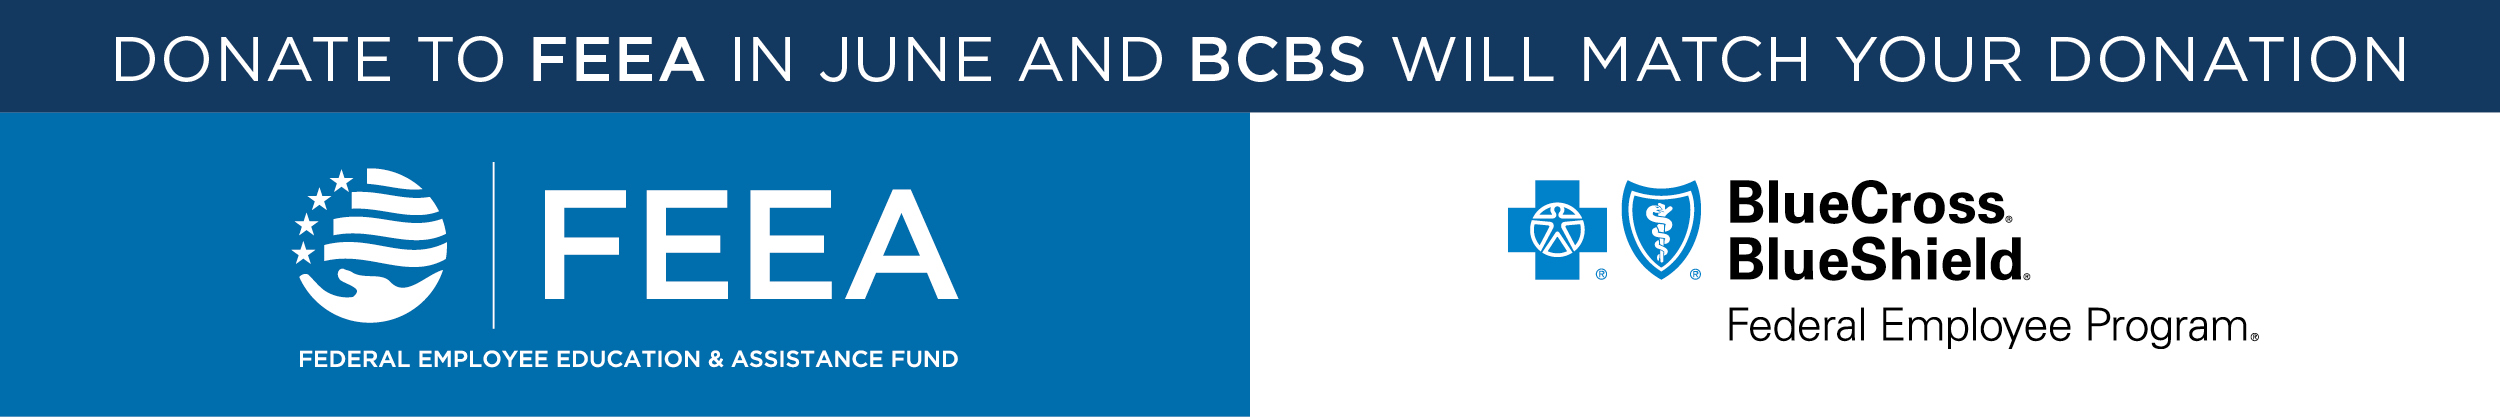 FEEA and BCBS donation matching banner